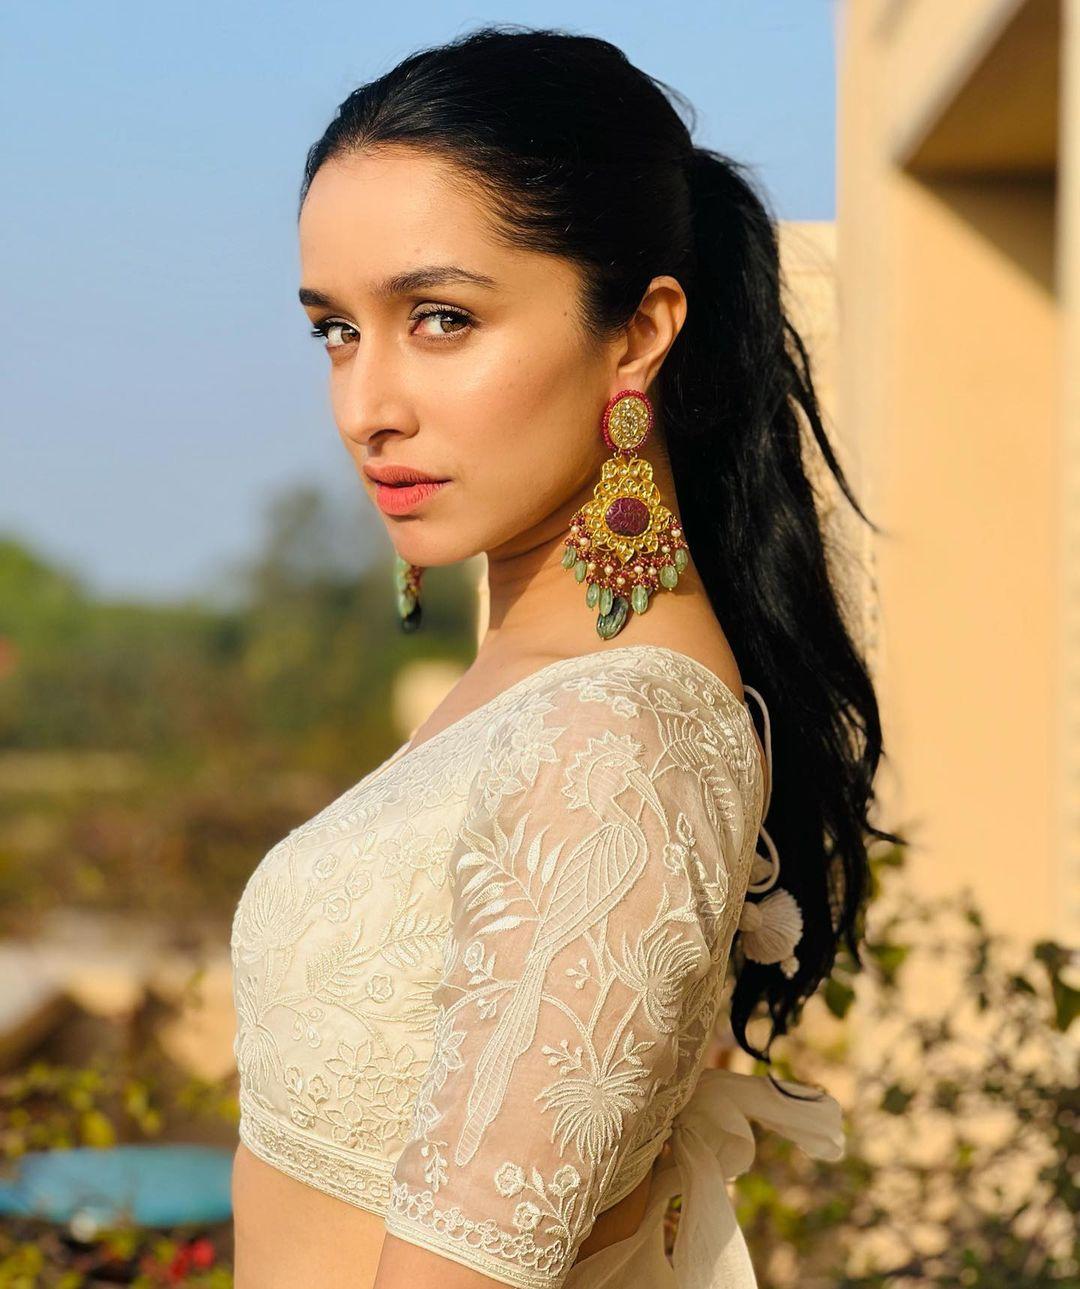 Shraddha Kapoor In Exclusive Very Glamorous Pictures Bollywood Actress Latest Hot Photos 1621